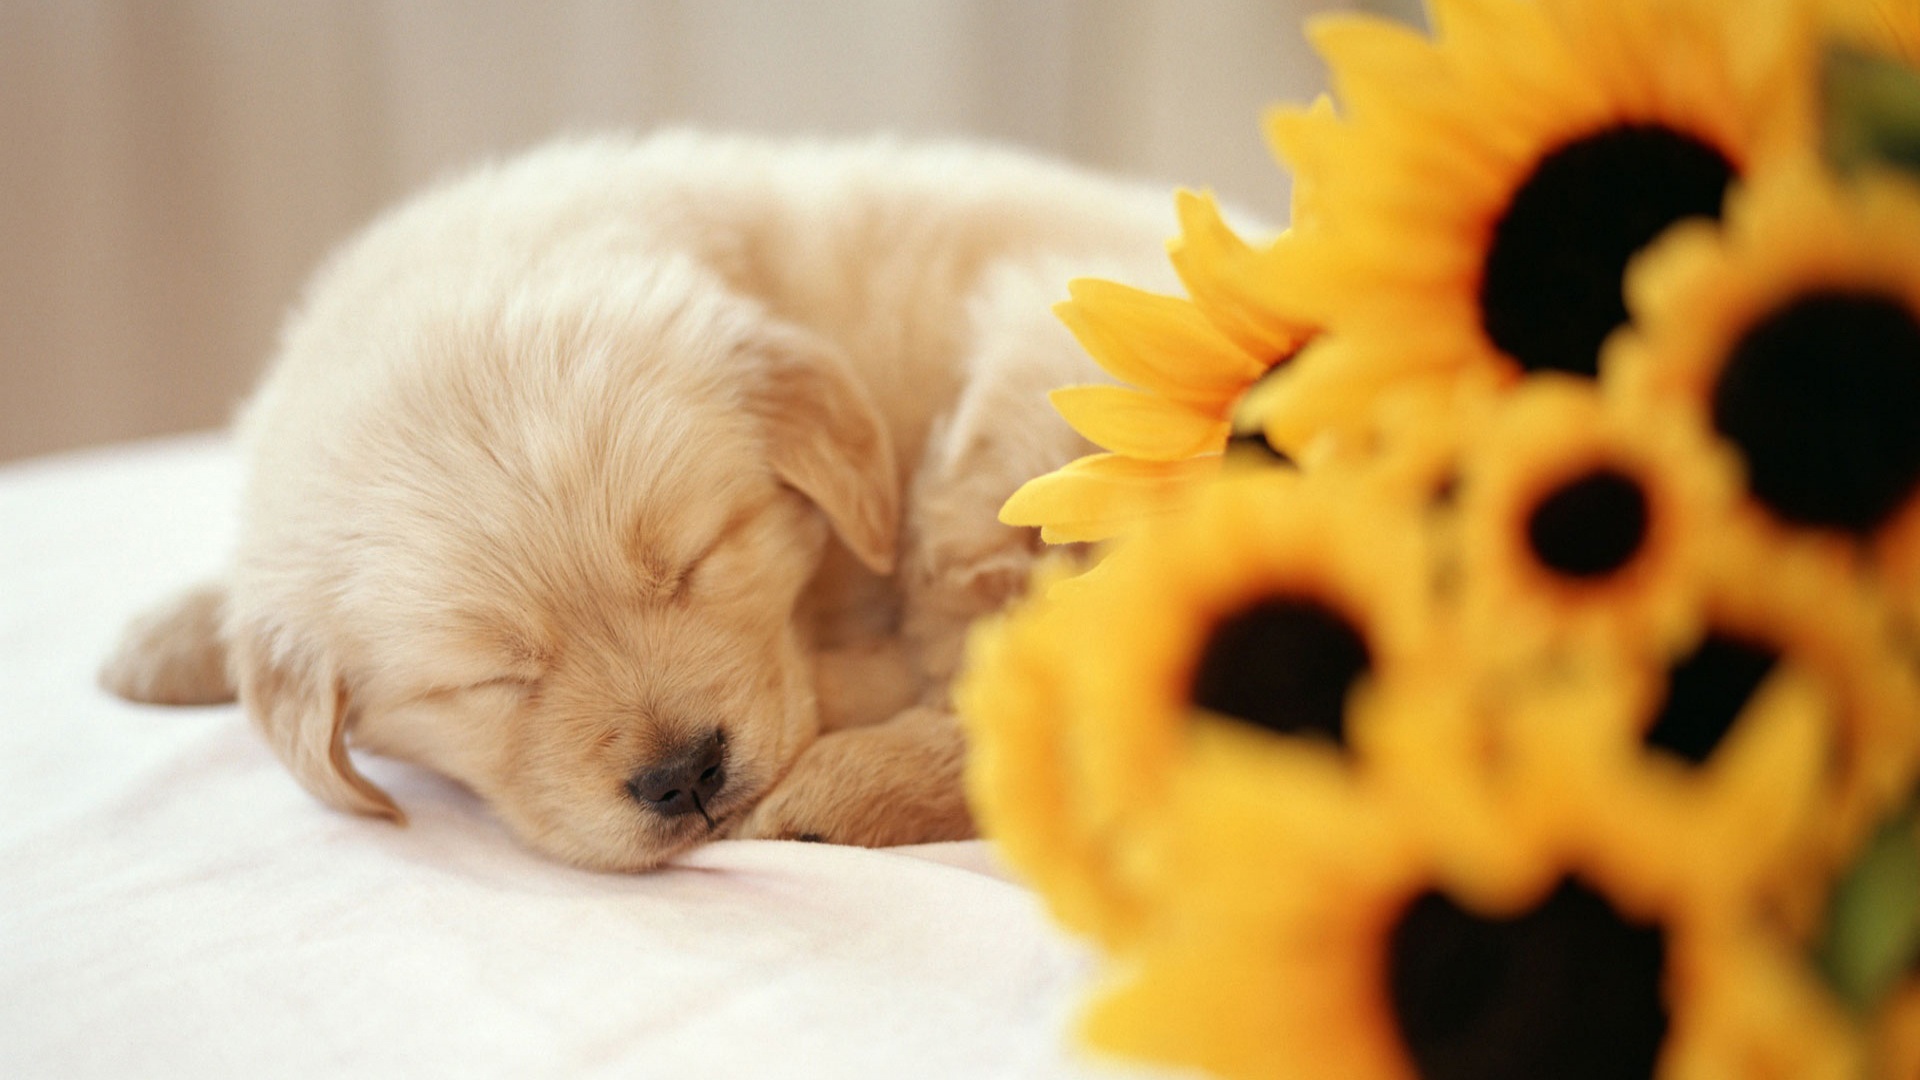 Sleeping Puppy Wallpapers 1920x1080